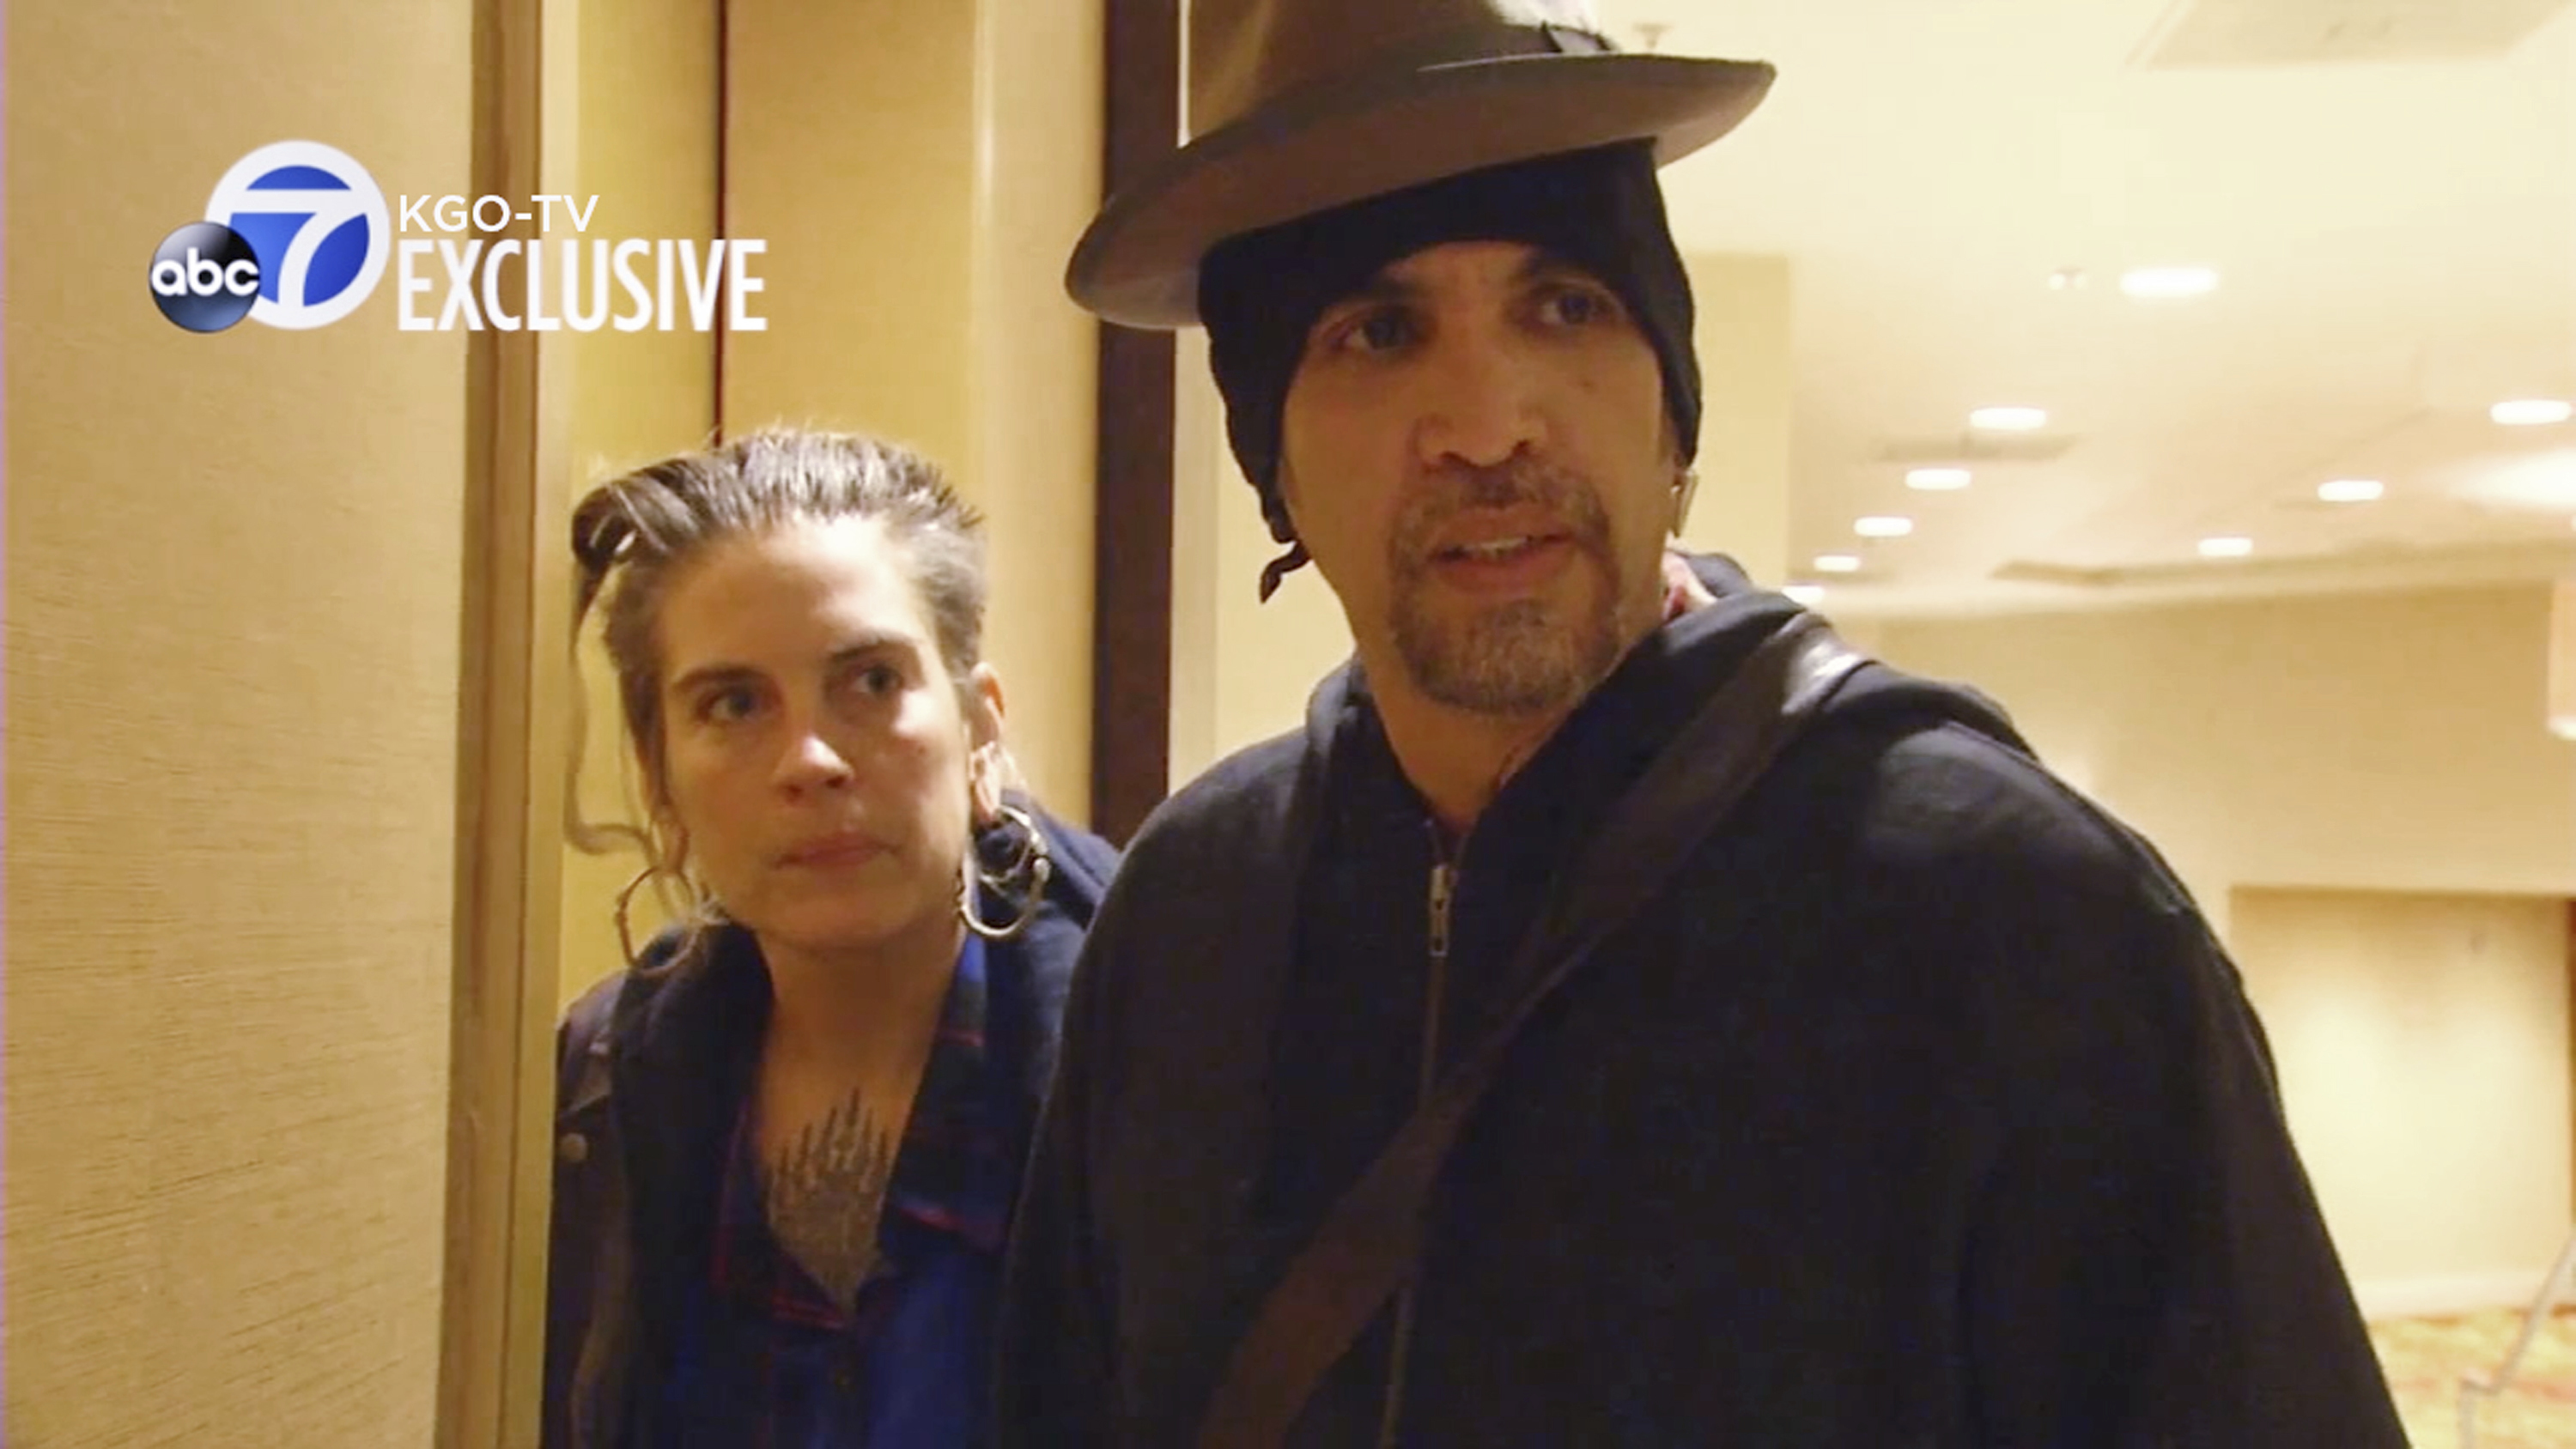 This still frame from exclusive video provided by San Francisco TV station KGO-TV, made late Sunday, Dec. 4, 2016, shows Derick Ion Almena, right, and Micah Allison, the couple who operated the Ghost Ship warehouse where dozens have died in a fire, at the Oakland, Calif., Marriott Hotel. When a KGO reporter asked if he had anything to say to the families of those who were killed, Almena said: "They're my children. They're my friends, they're my family, they're my loves, they're my future. What else do I have to say?" (KGO-TV via AP)